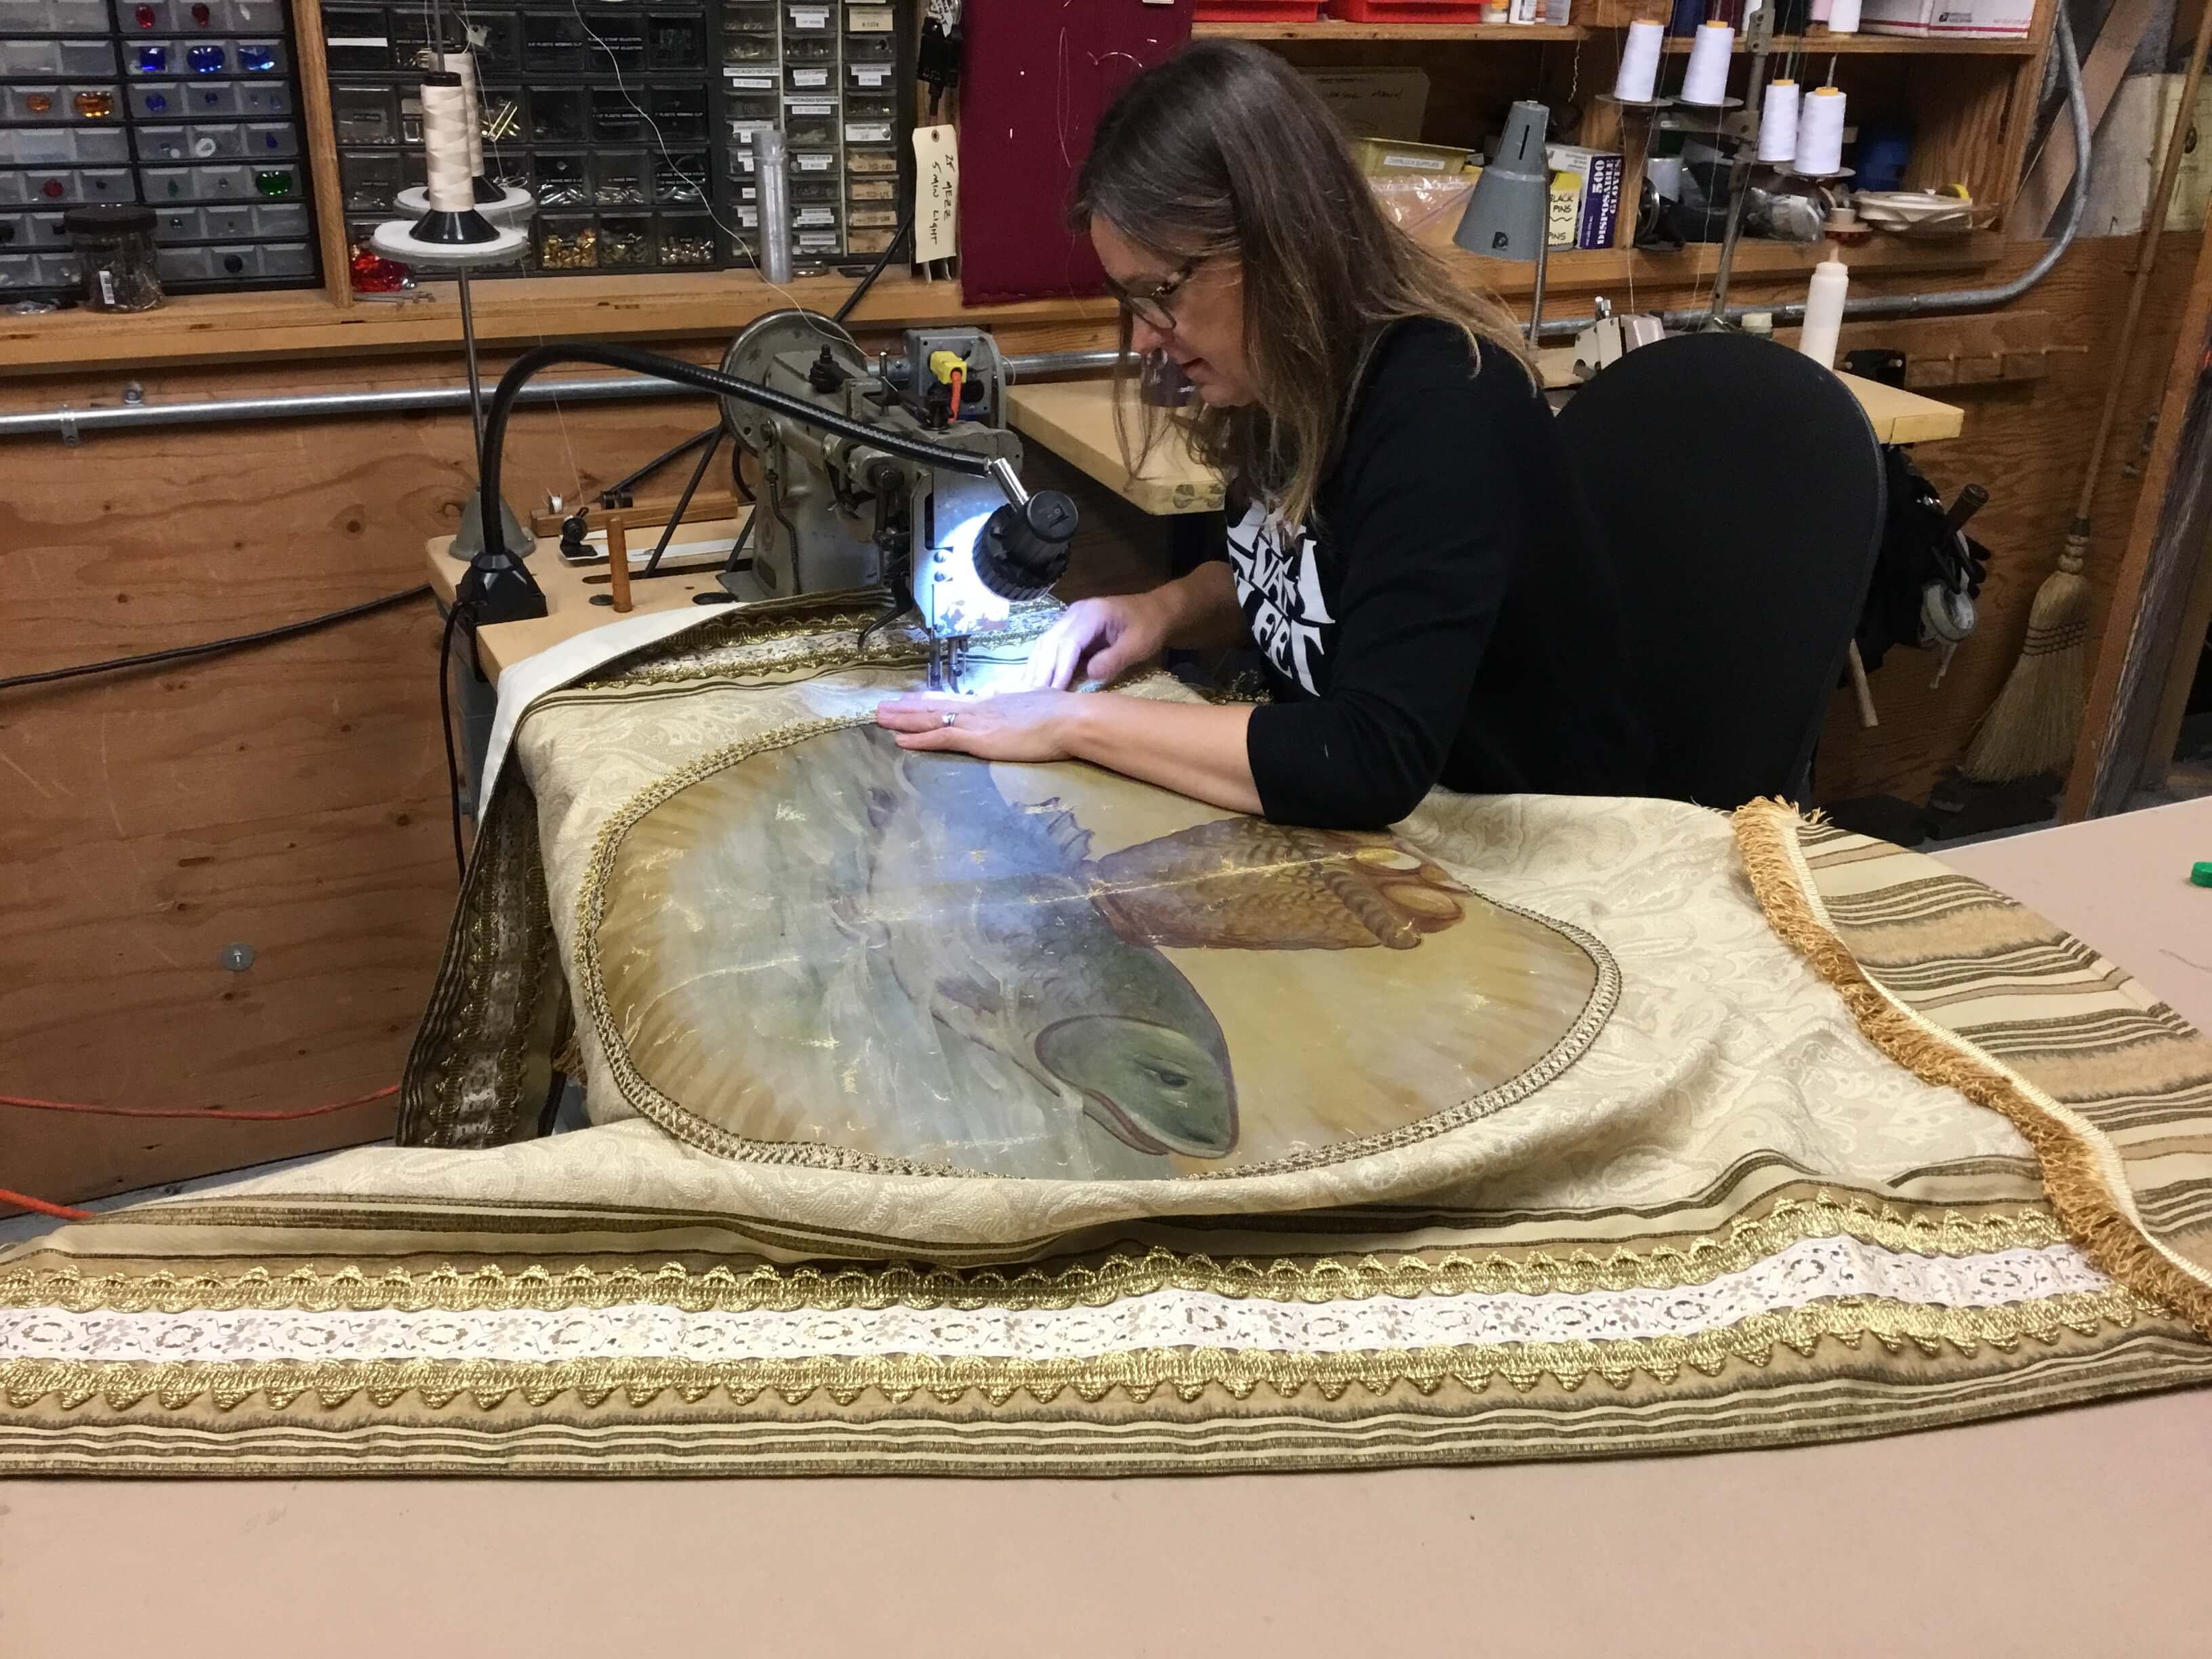 Tara Pellack stitching one of the banners for Act I of Tosca using an actual church painting at the center and banner research.